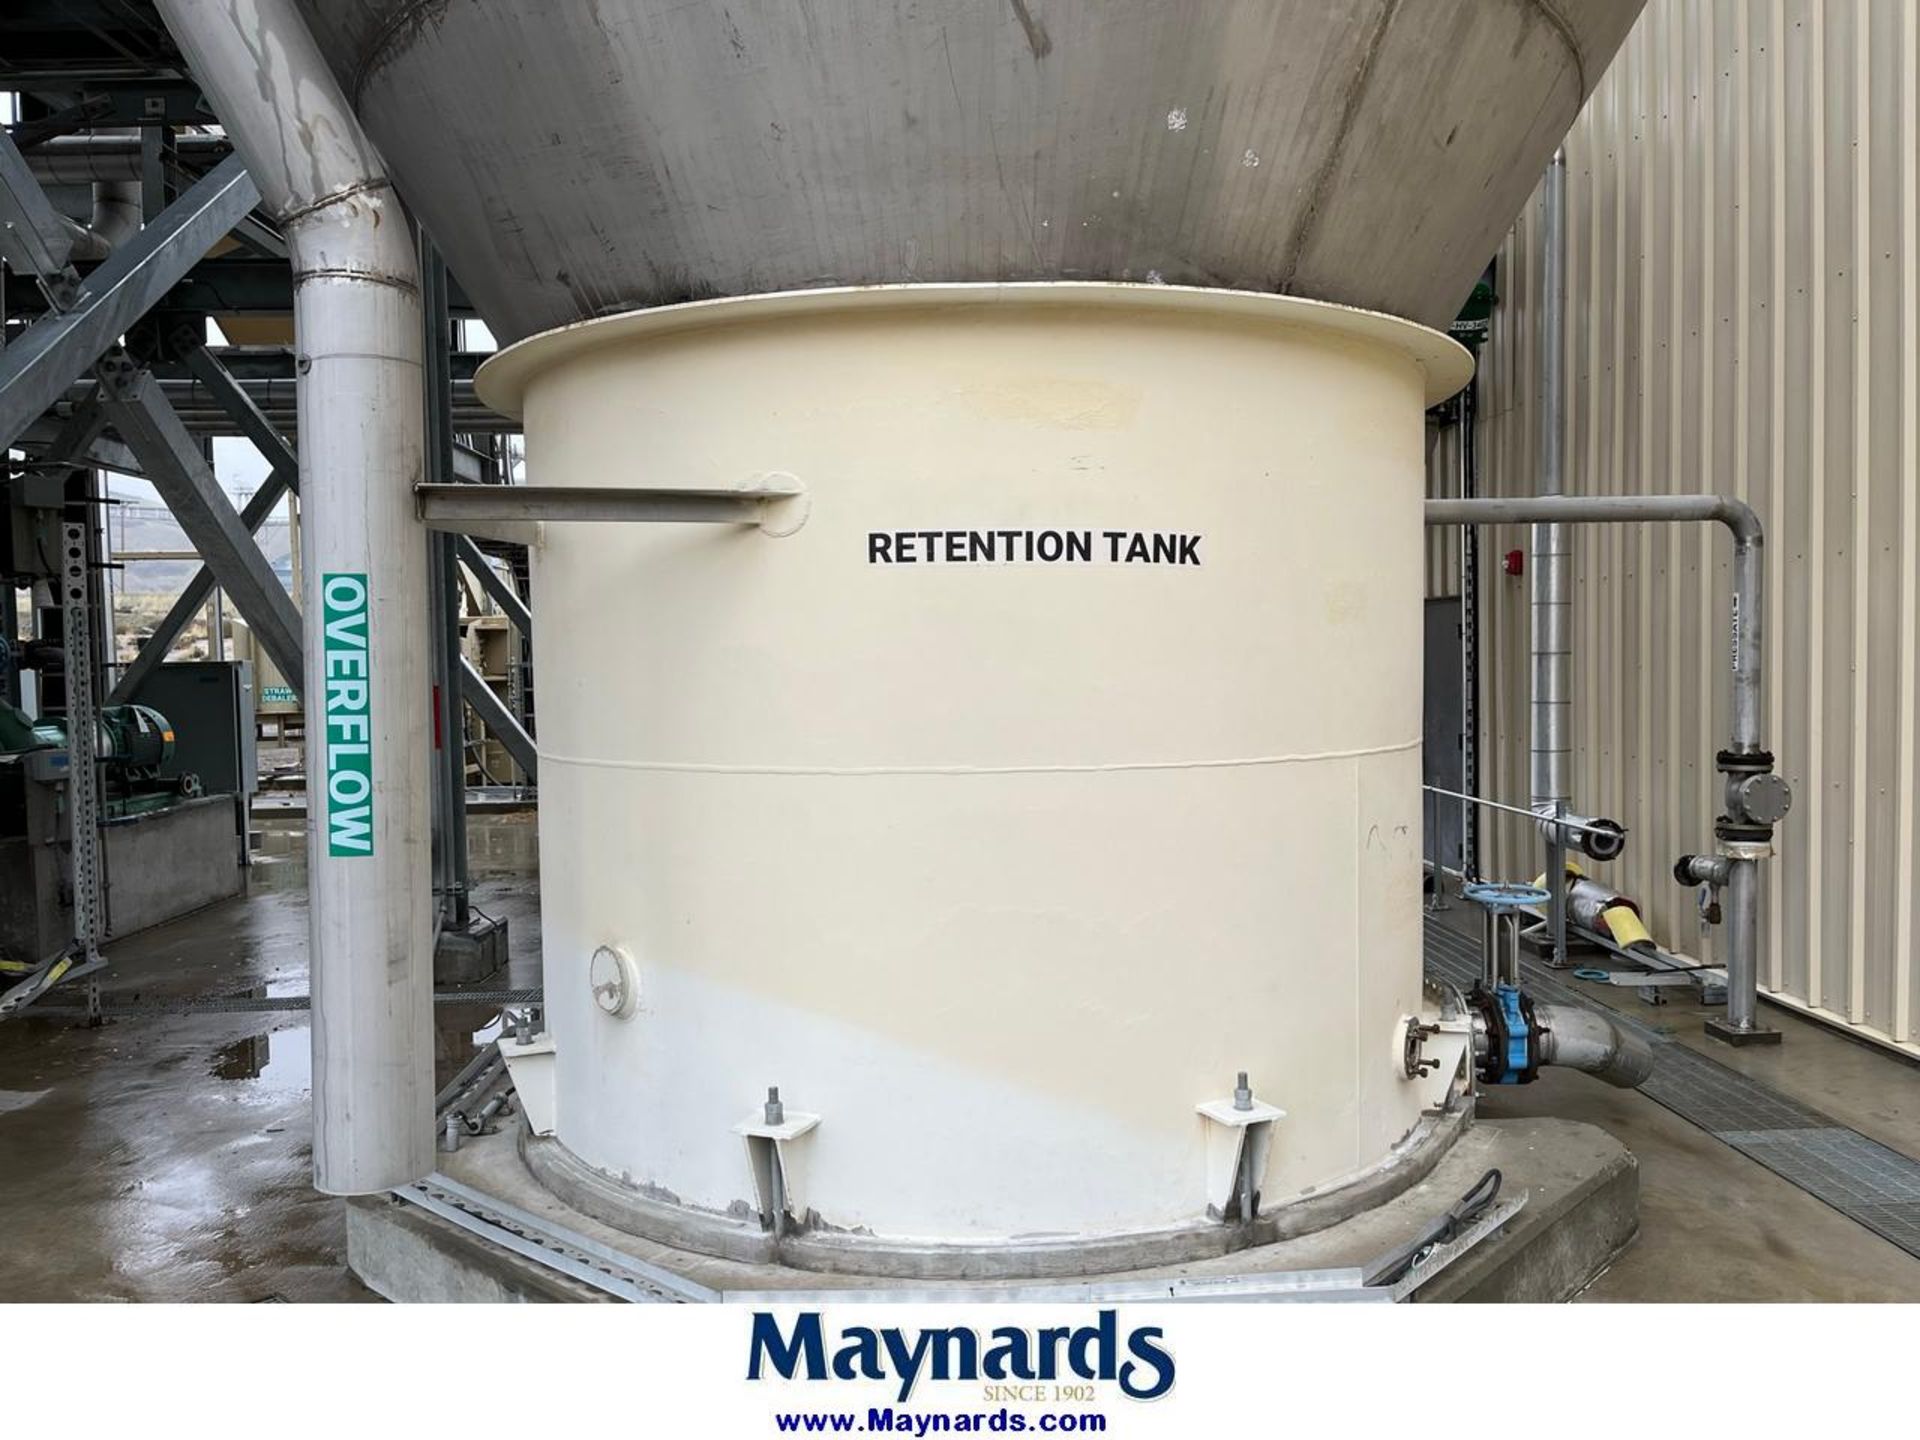 74,500 GALLON T BAILEY 316L STAINLESS STEEL TANK 58' TALL 16' DIAMETER MANUFACTURED 2018 - Image 2 of 3